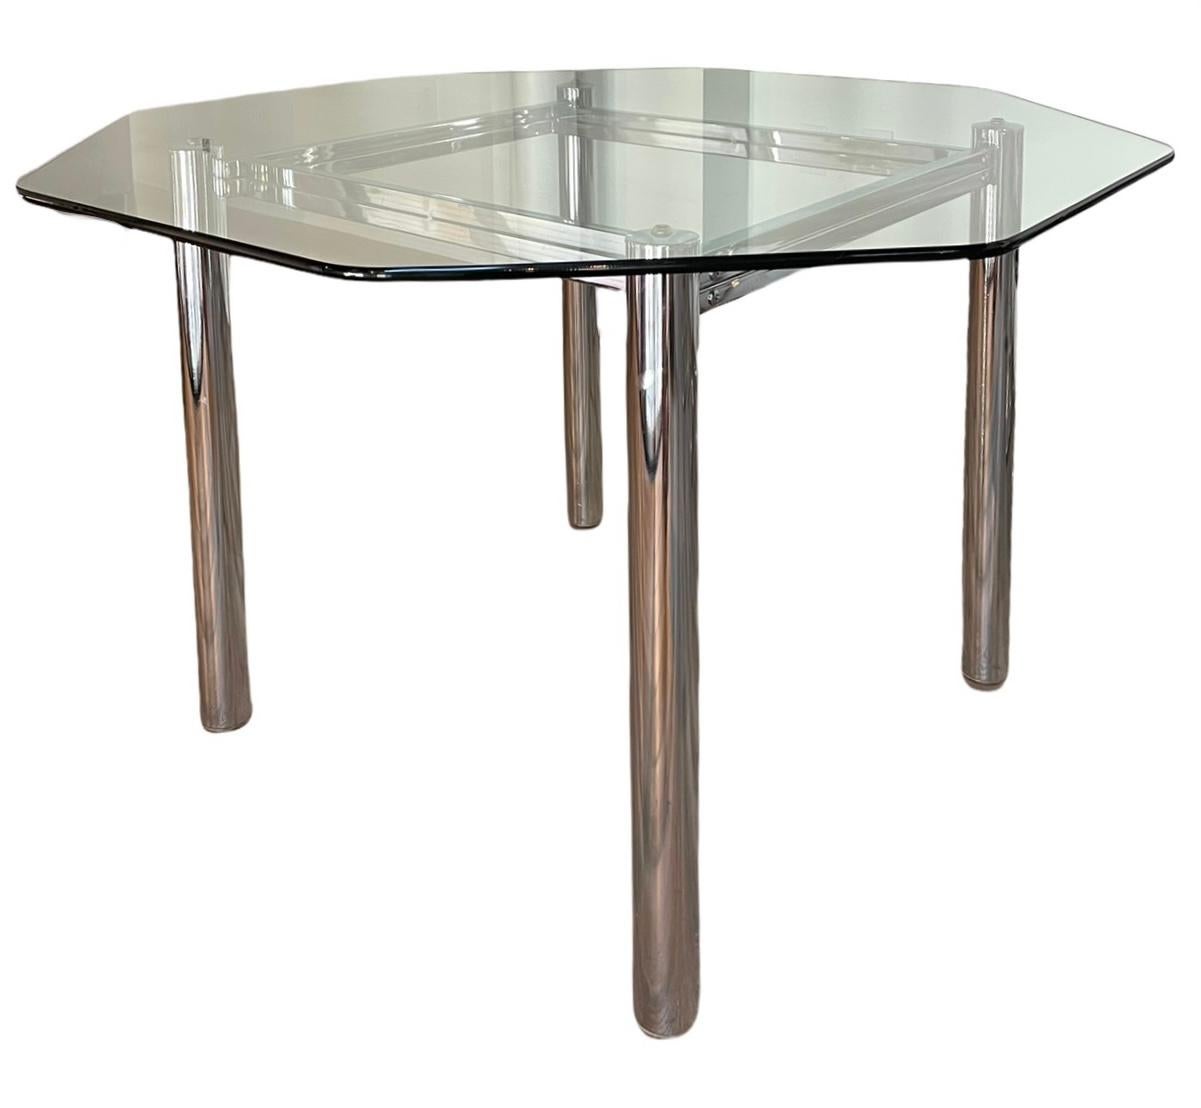 Measures: 29.25” Height x 48” Diameter

Table base: 29.5” L x 29.5” W.